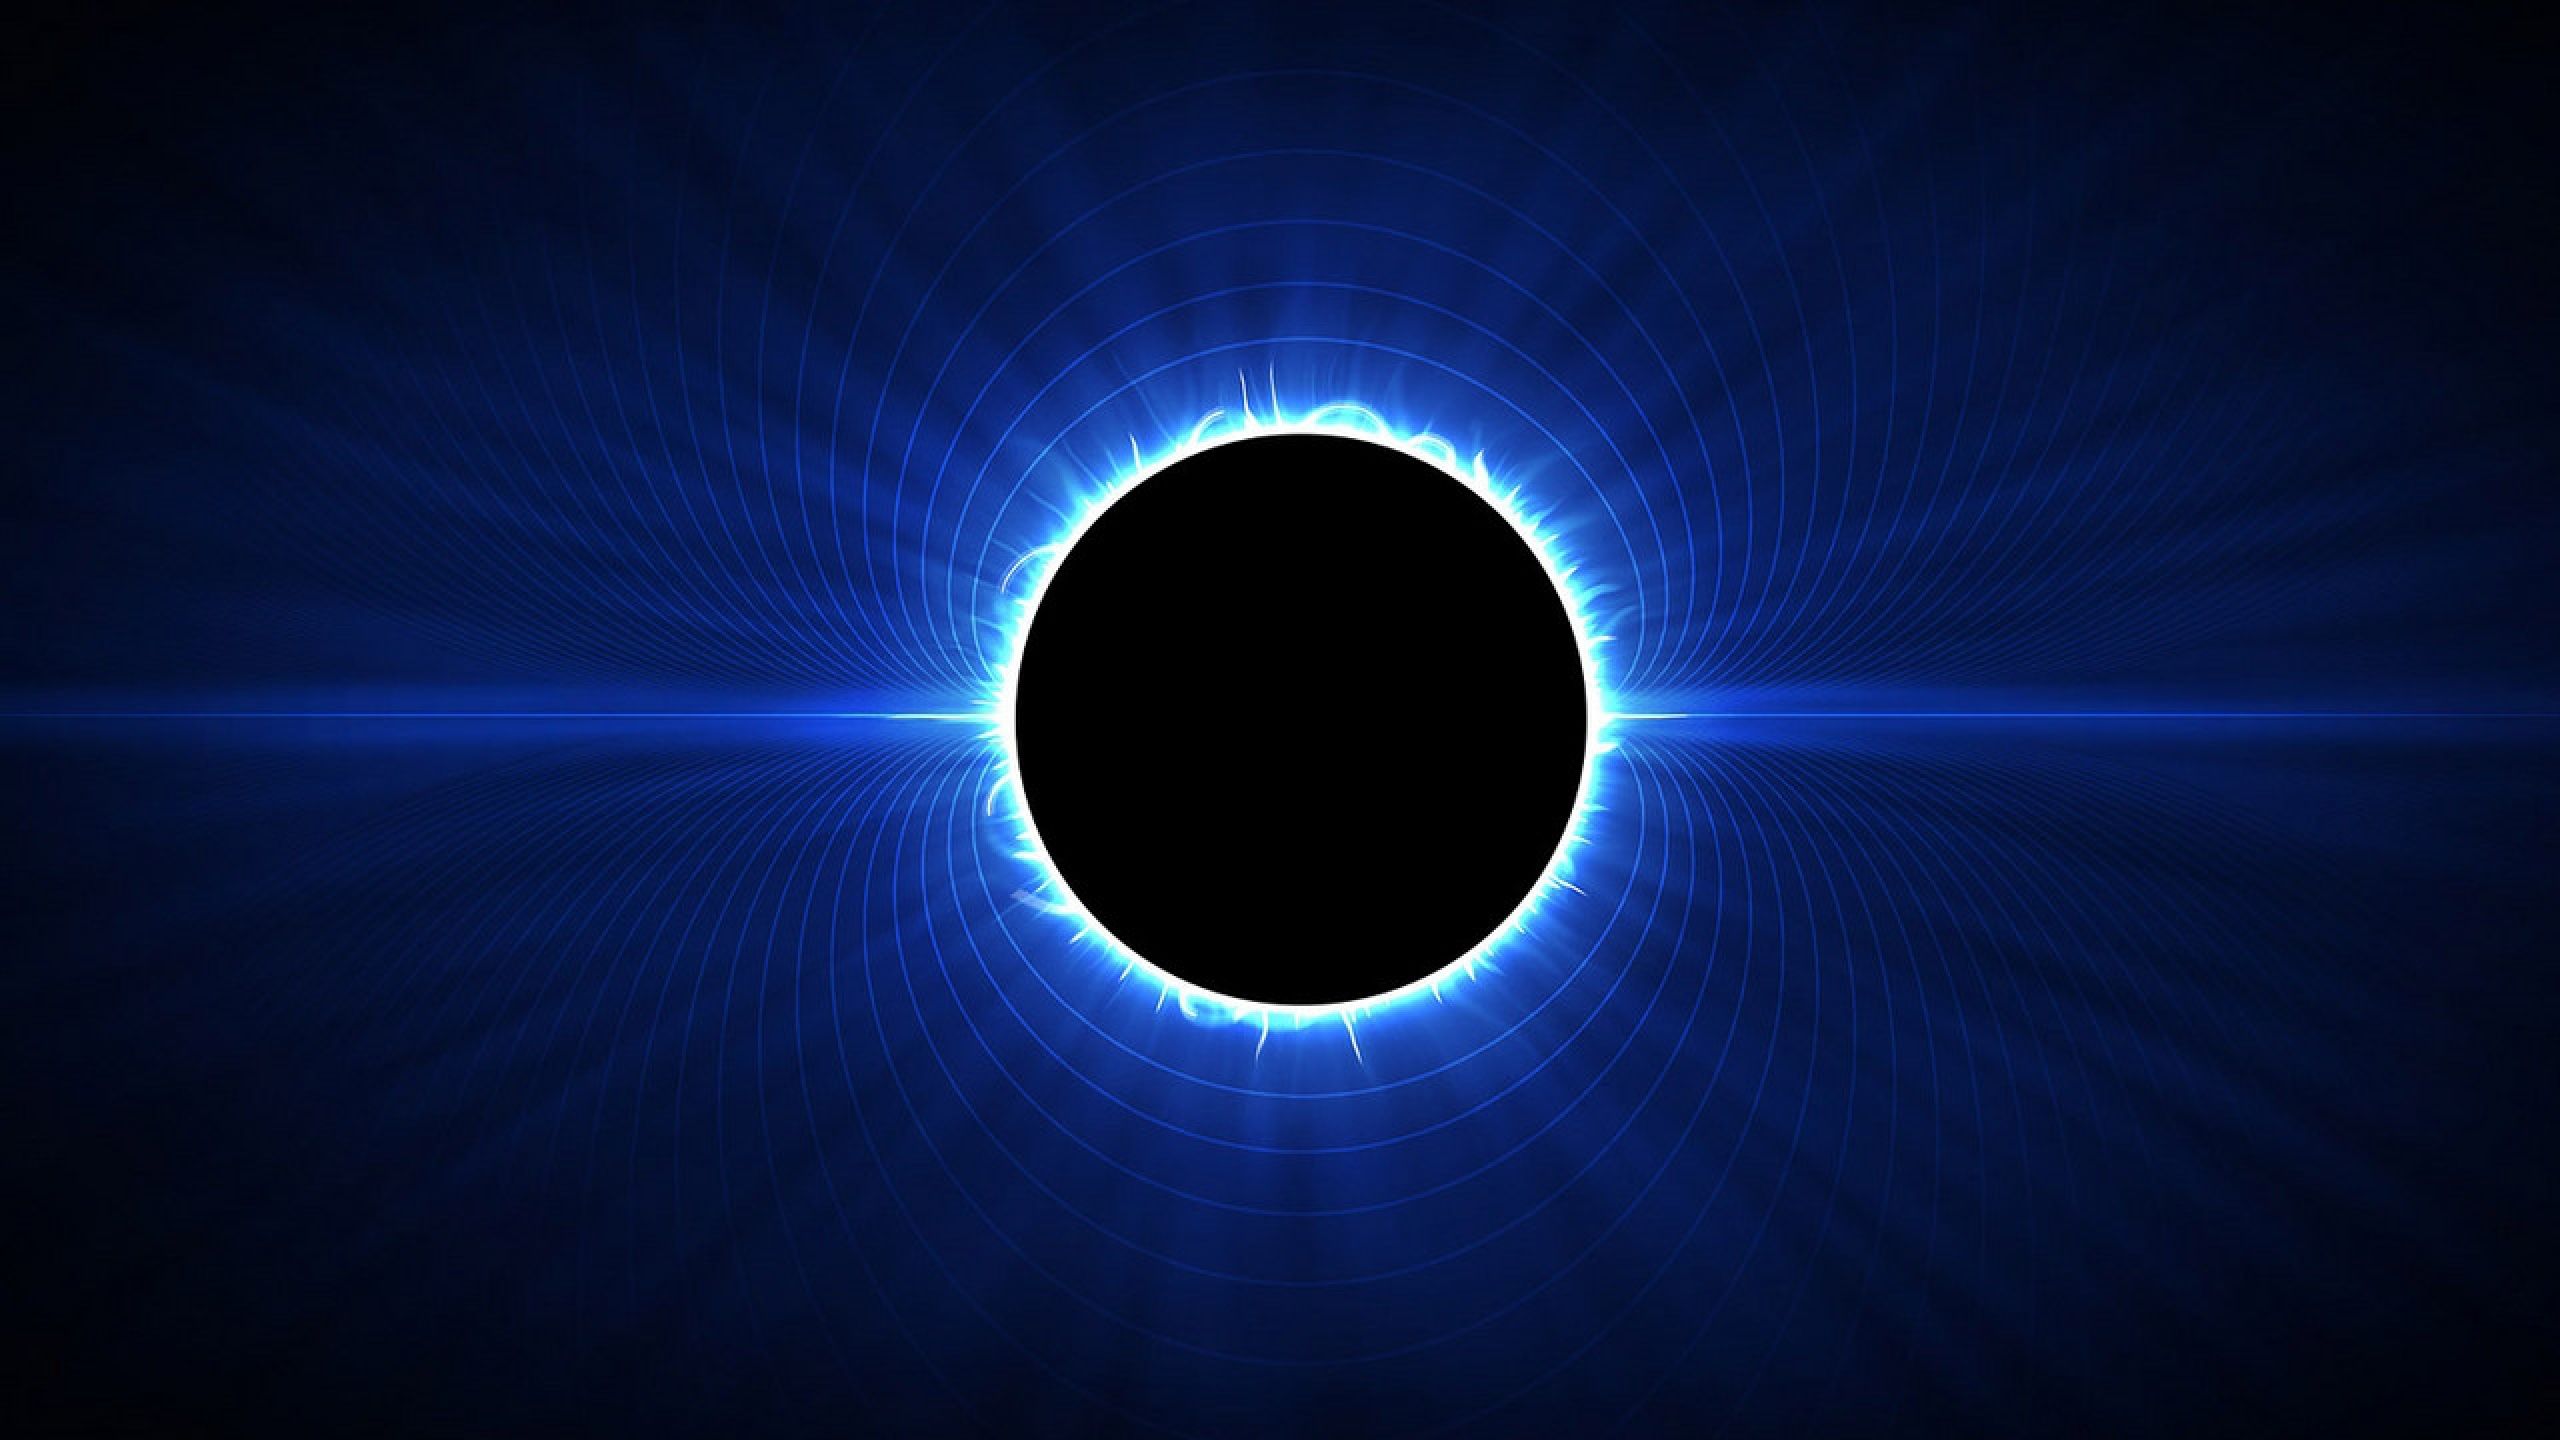 Download Wallpaper 2560x1440 Abstraction, Eclipse, Space, Light ...